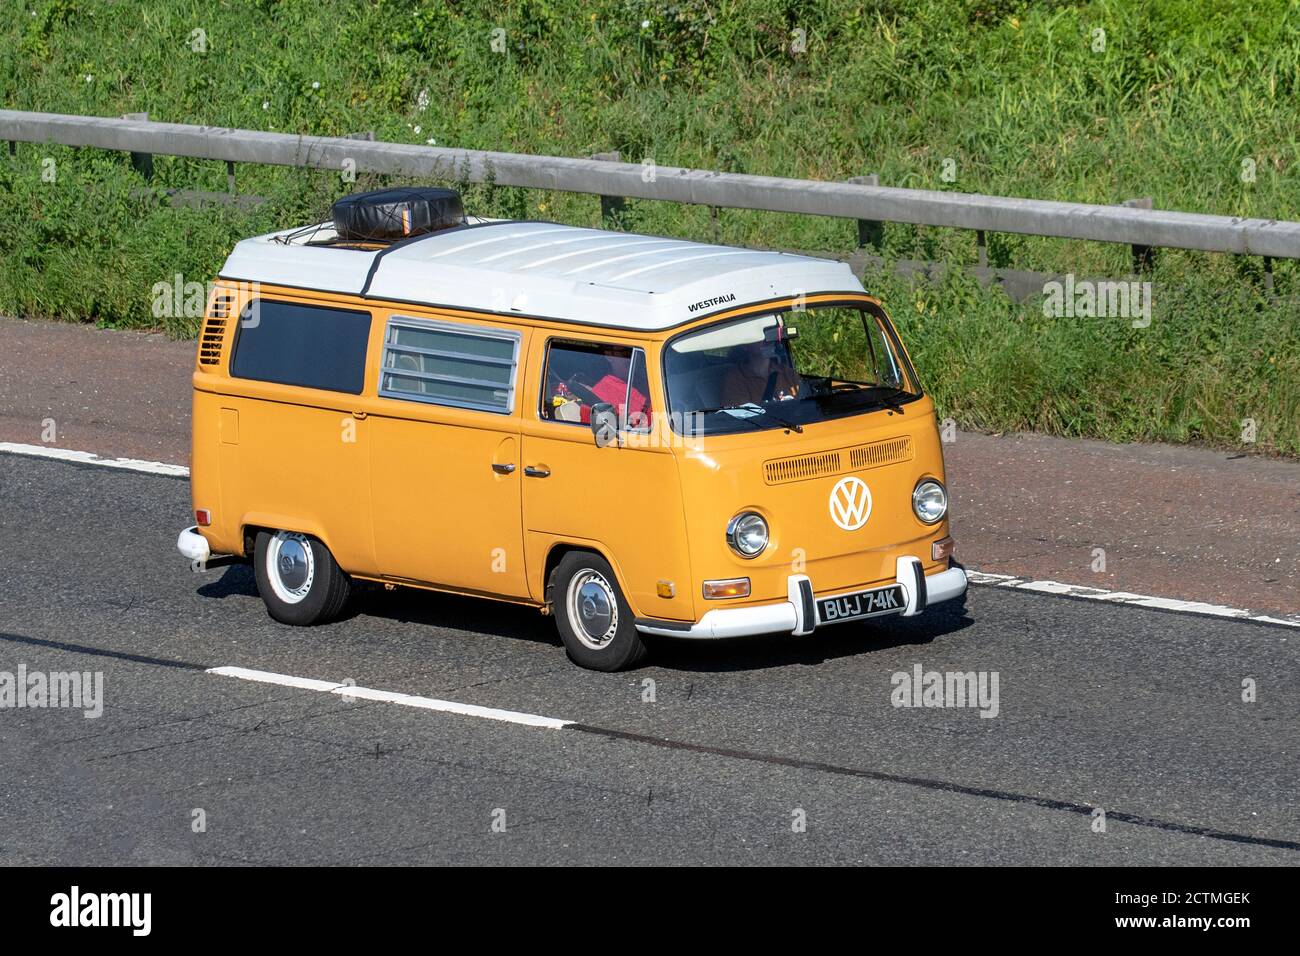 1972 70s old Bay window VW Volkswagen Westfalia Caravans and Motorhomes, campervans on Britain's roads, RV leisure vehicle, family holidays, caravanette vacations, Touring caravan holiday, 70s van conversions, Vanagon autohome, life on the road UK. Stock Photo